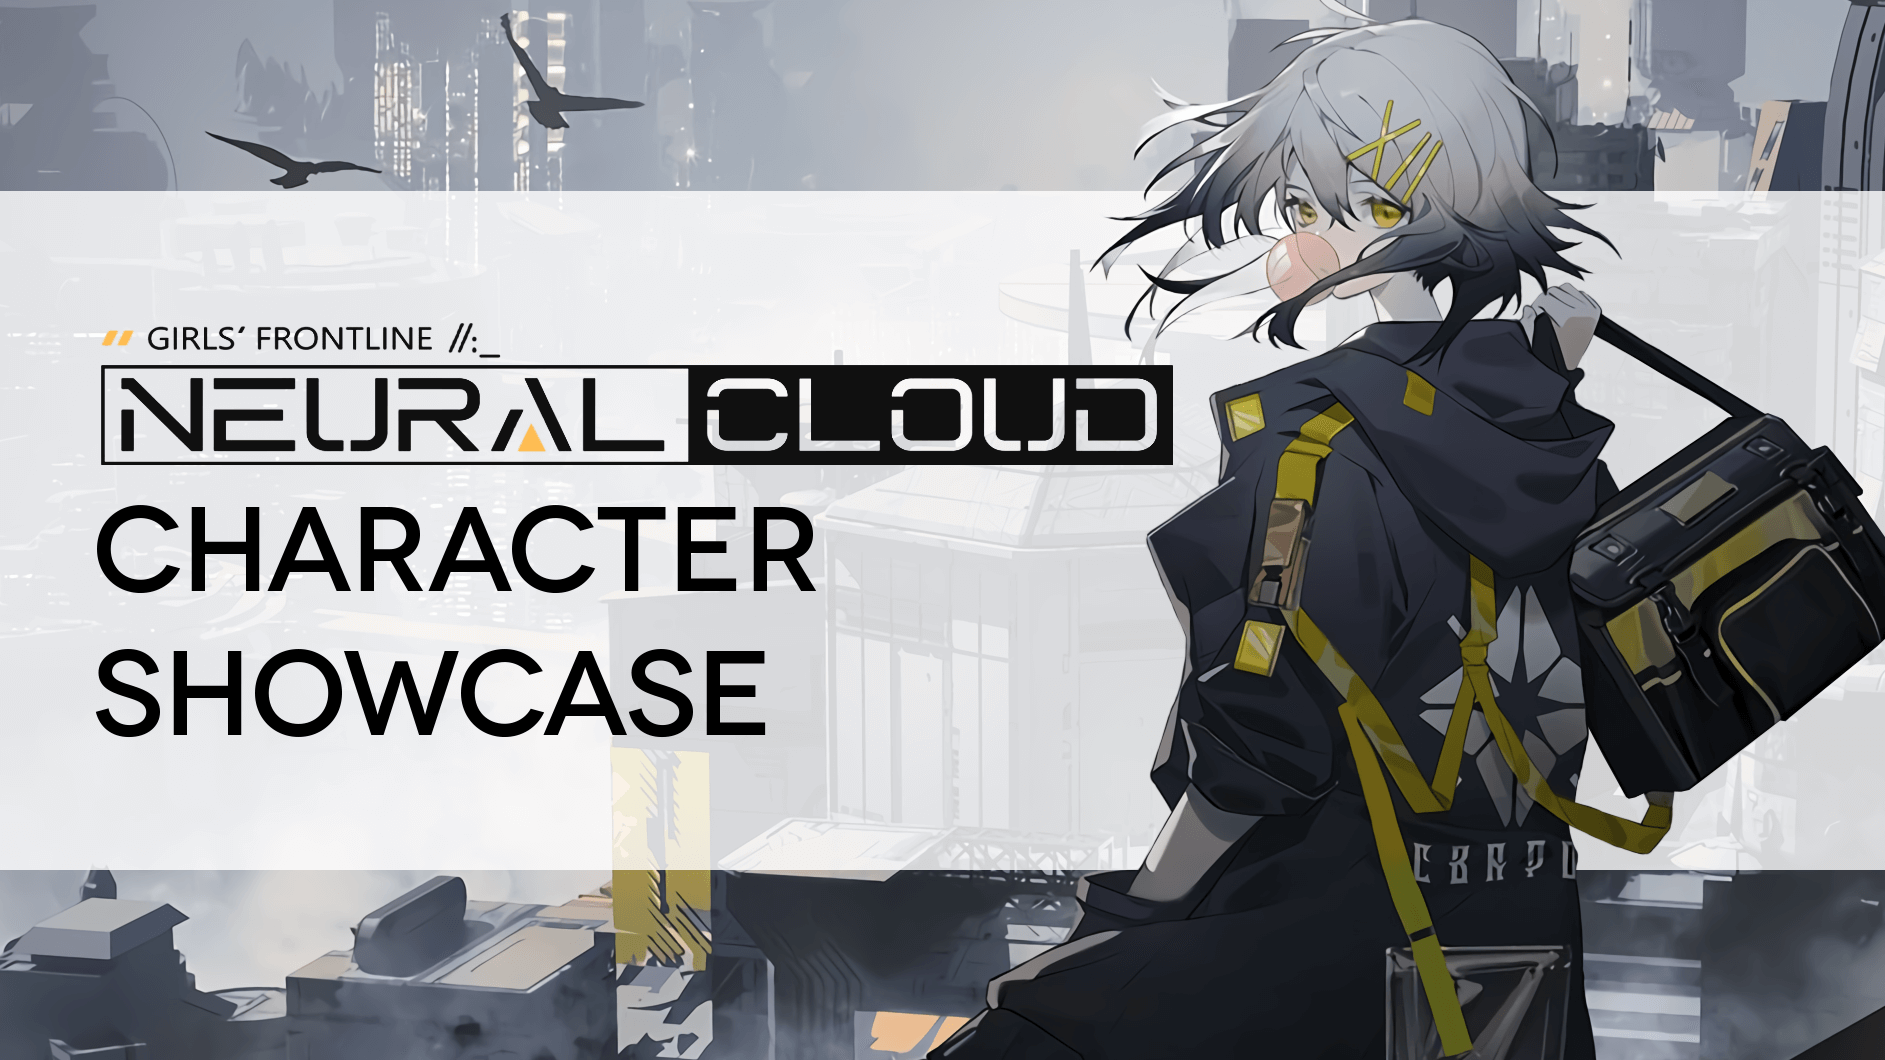 "Neural Cloud Character Showcase" cover image featuring Croque